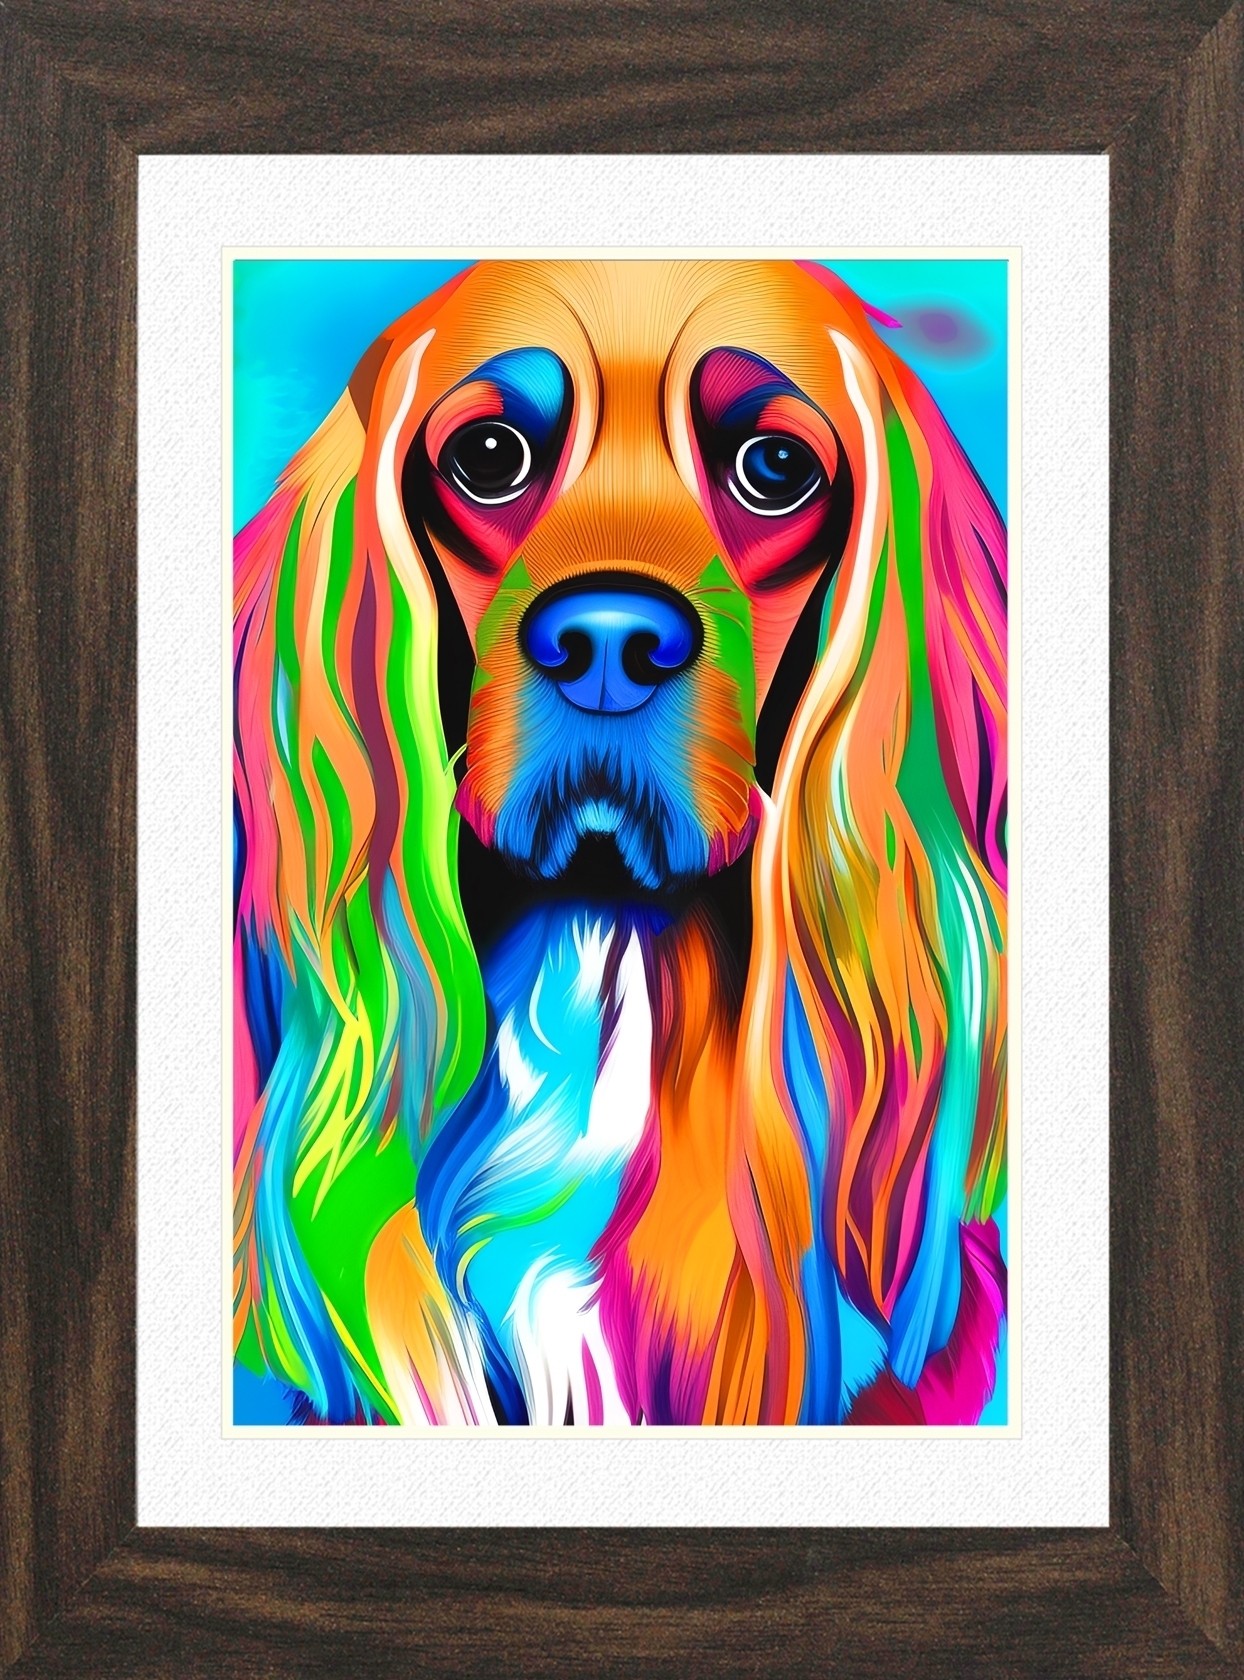 Cocker Spaniel Dog Picture Framed Colourful Abstract Art (30cm x 25cm Walnut Frame)